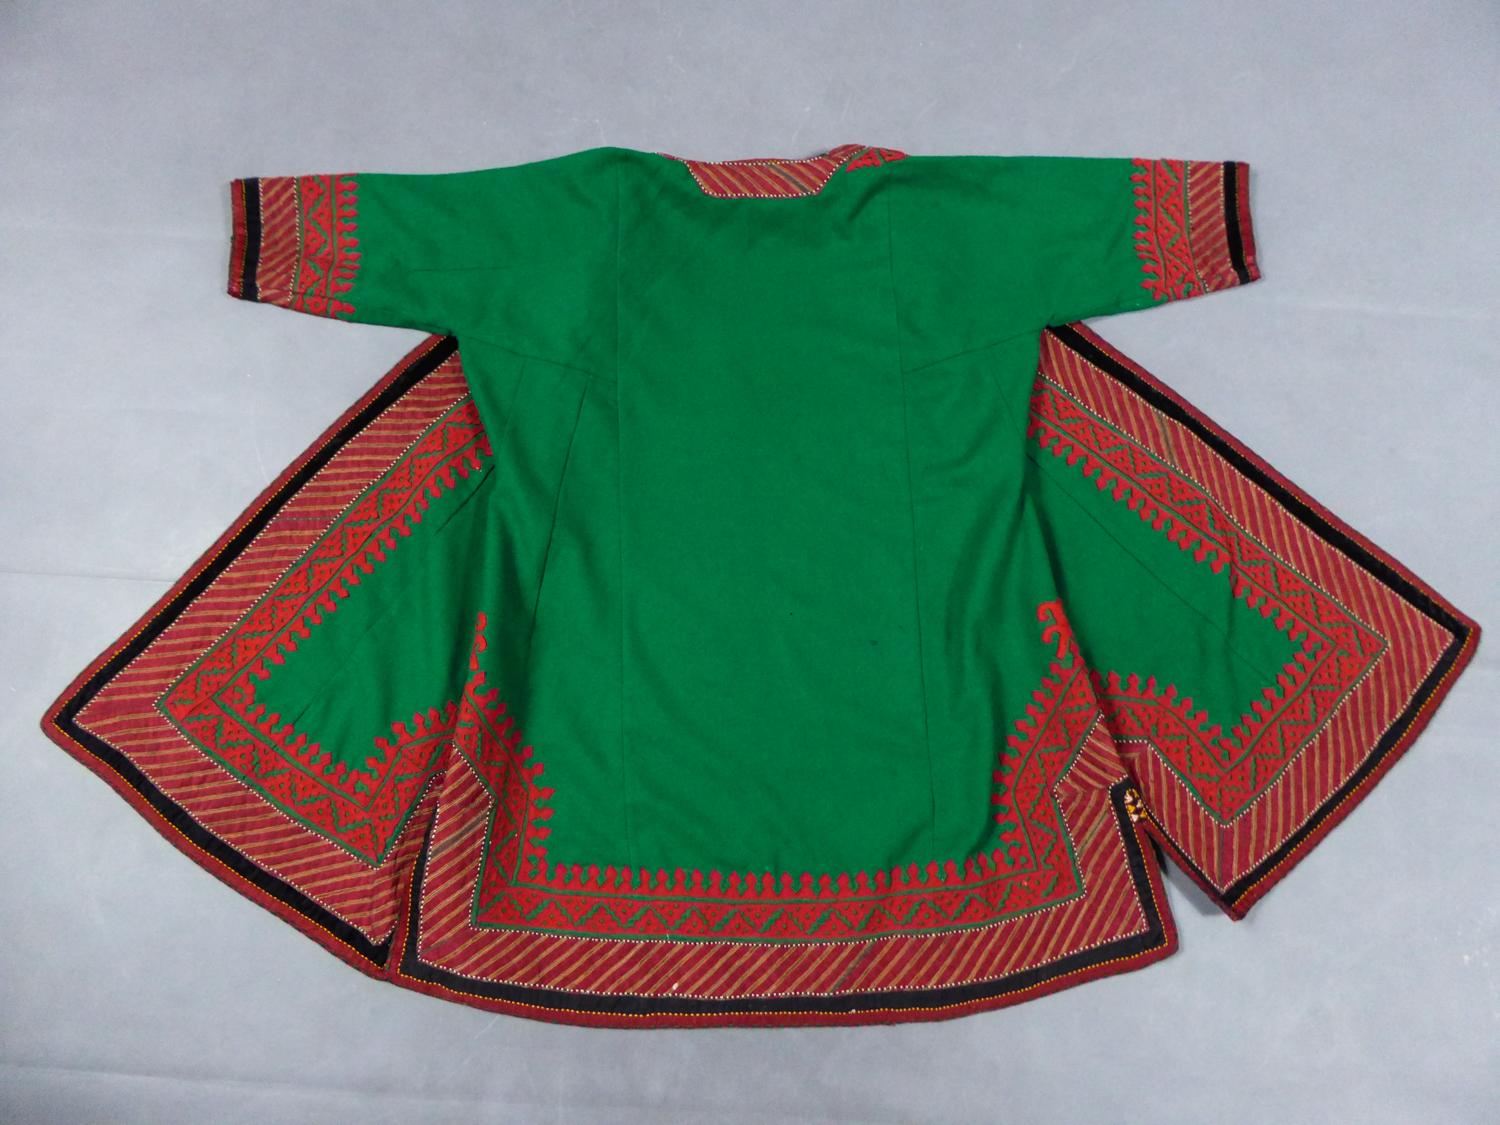 Circa 1950
Turkmenistan

Coat or Kaftan in green wool felt from Istanbul and from Turkmenistan in the years 1950/1960. Kaftan cut with three quarter sleeves and split on both sides. Very nice work of ethnic motifs in red placed wool. Edge of the